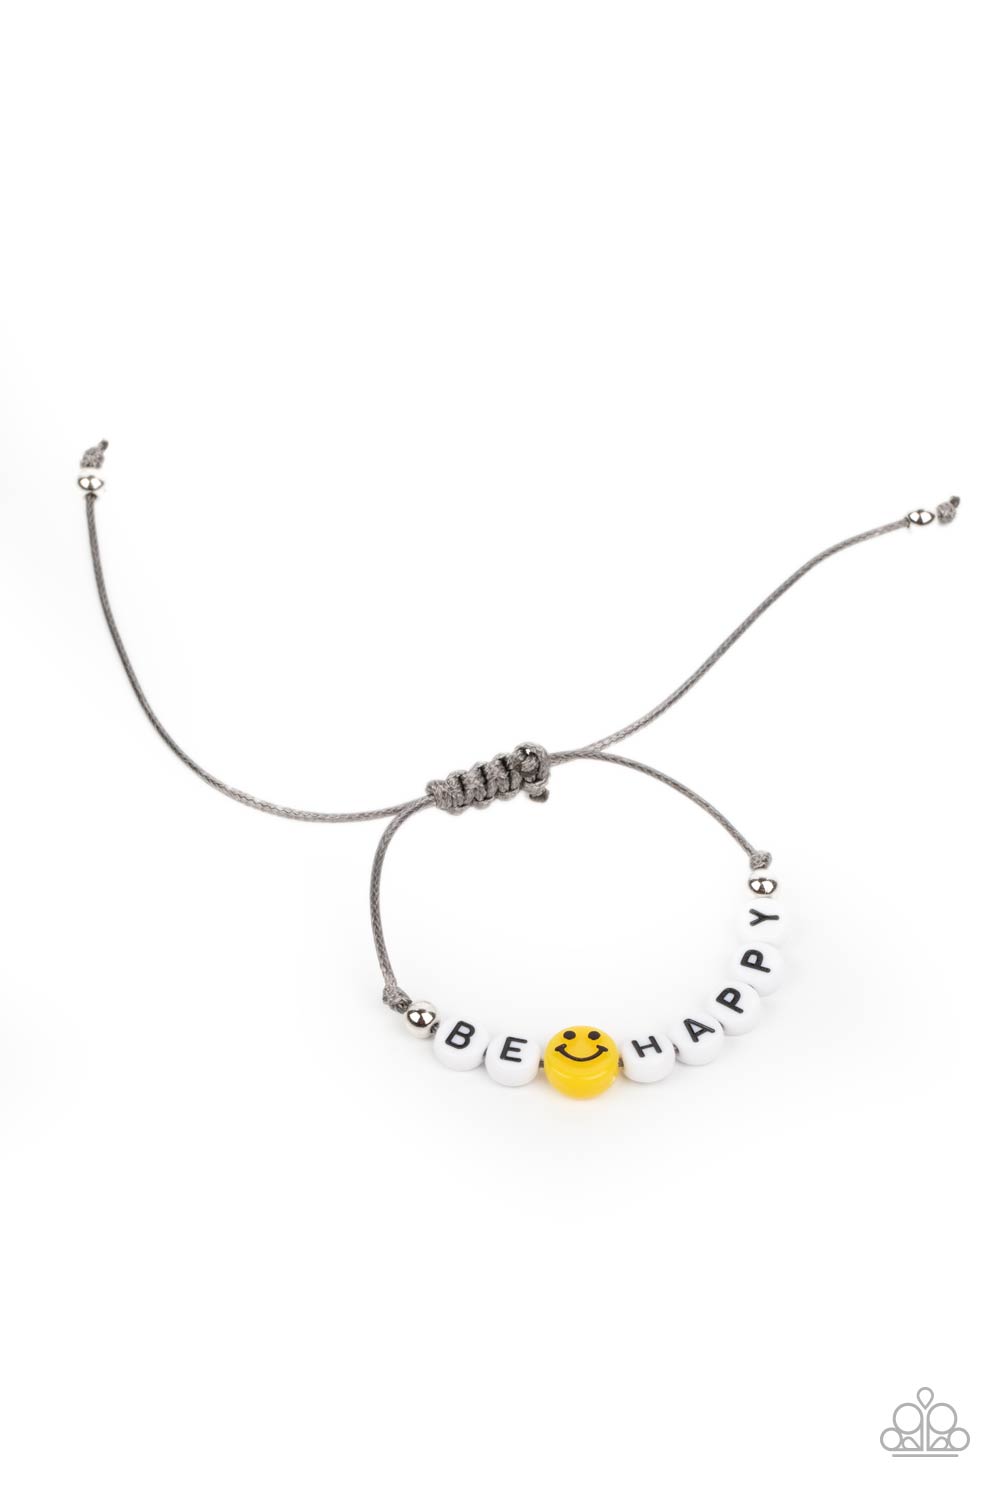 I Love Your Smile Silver Inspirational Bracelet - Paparazzi Accessories- lightbox - CarasShop.com - $5 Jewelry by Cara Jewels